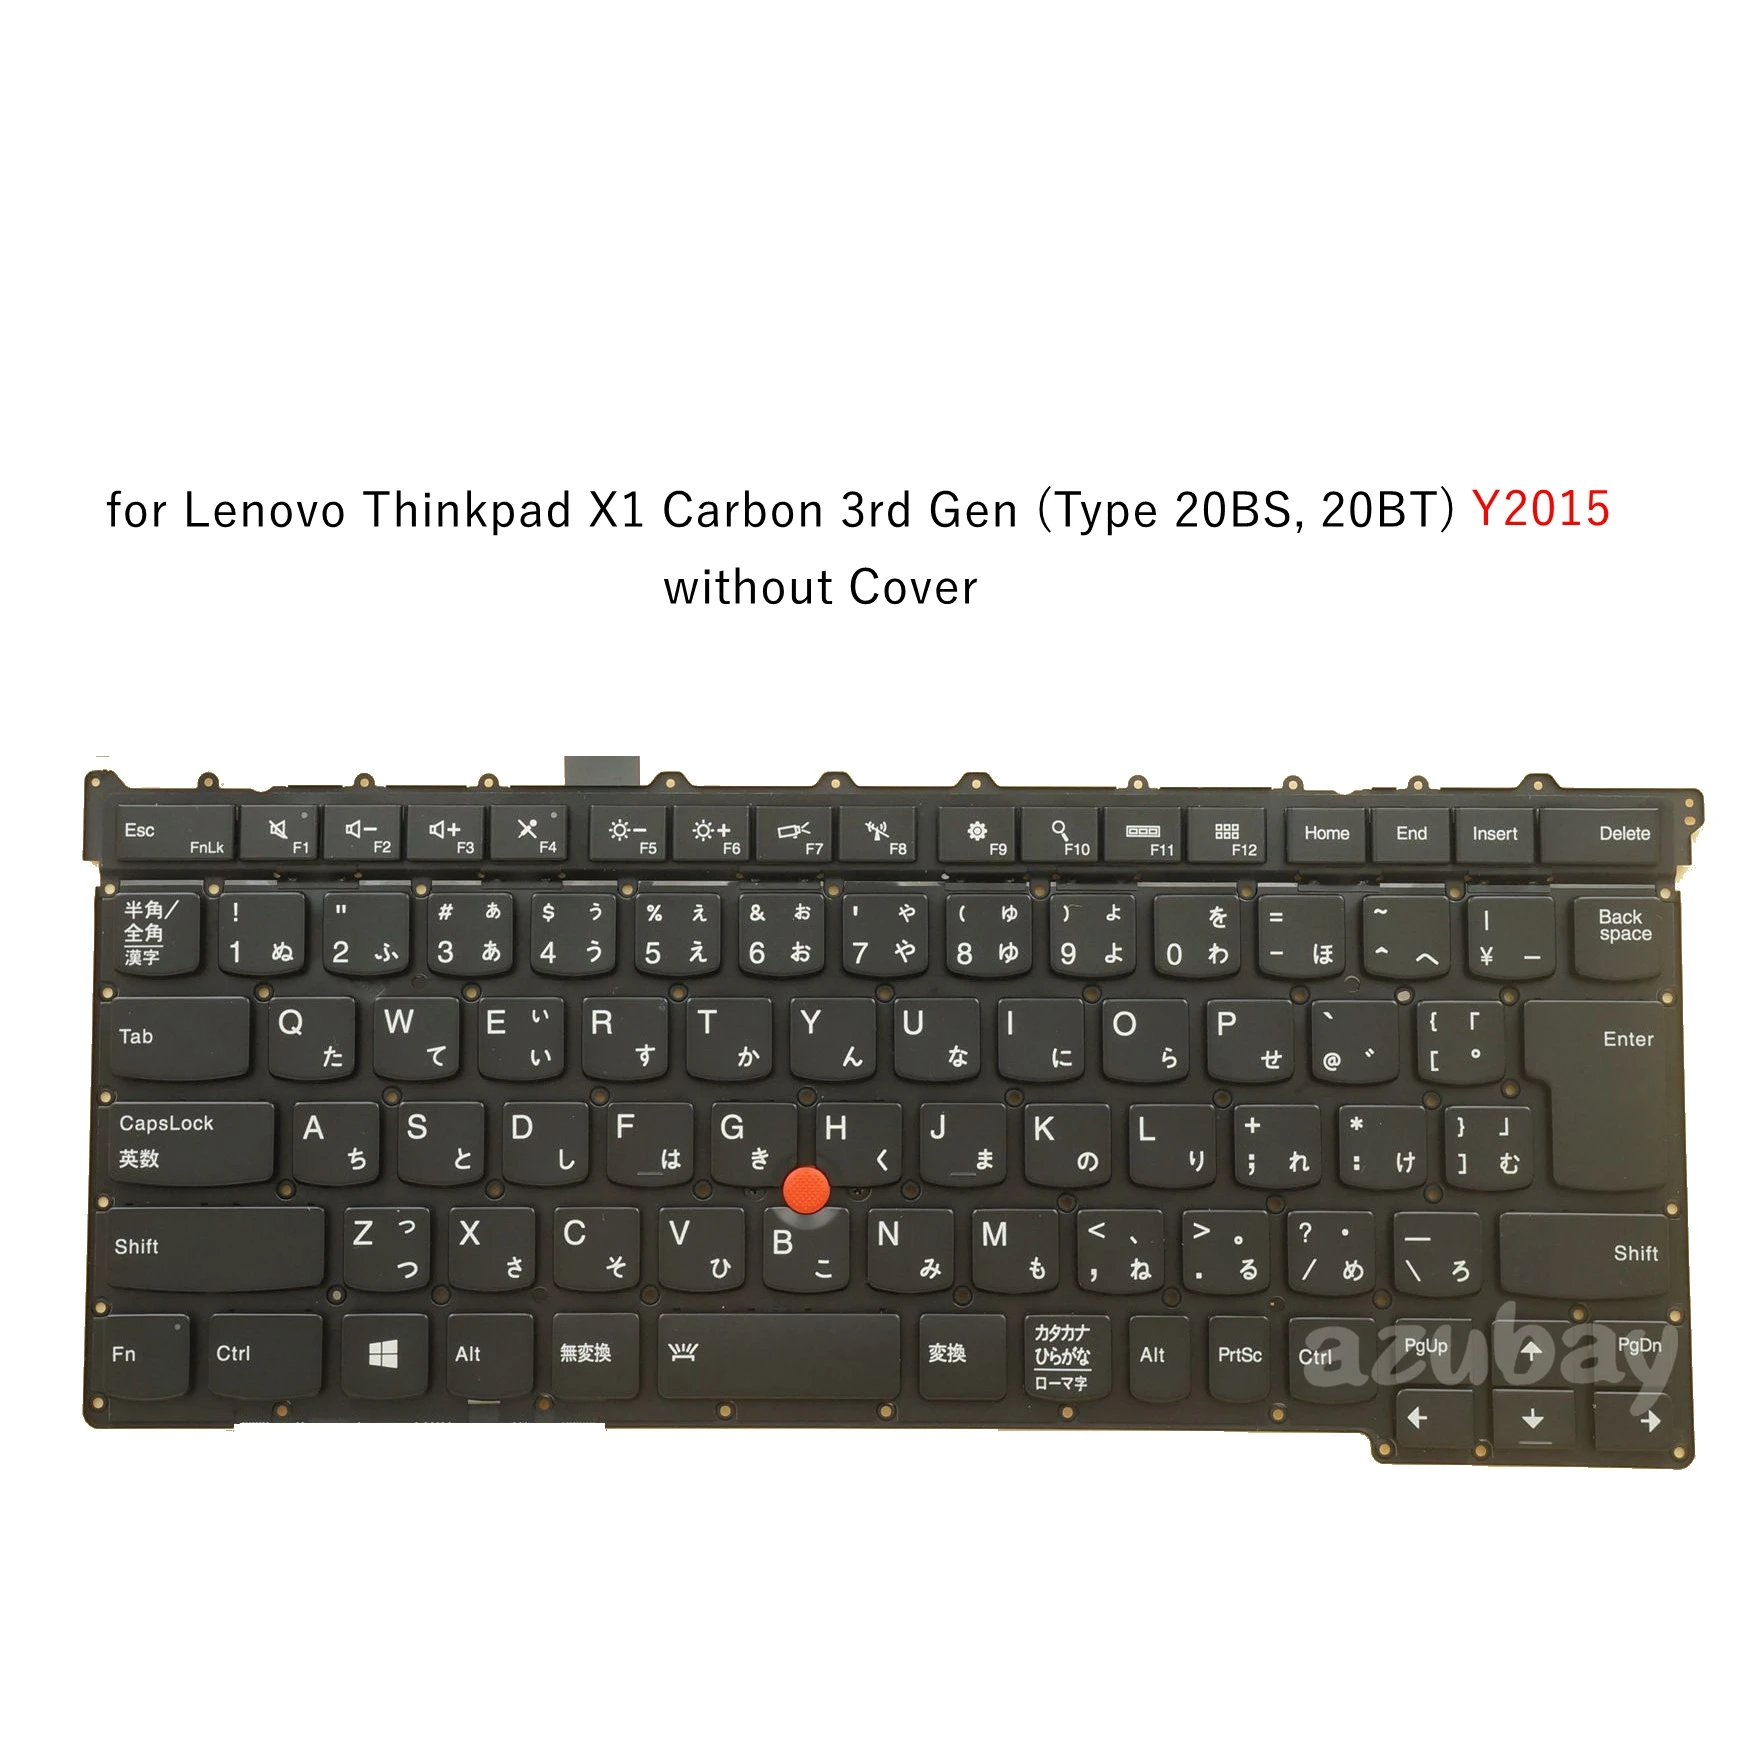 

Japanese French AZERTY QWERTZ Keyboard for Lenovo Thinkpad X1 Carbon 3rd Gen (Type 20BS, 20BT) Y2015, Backlit No Cover